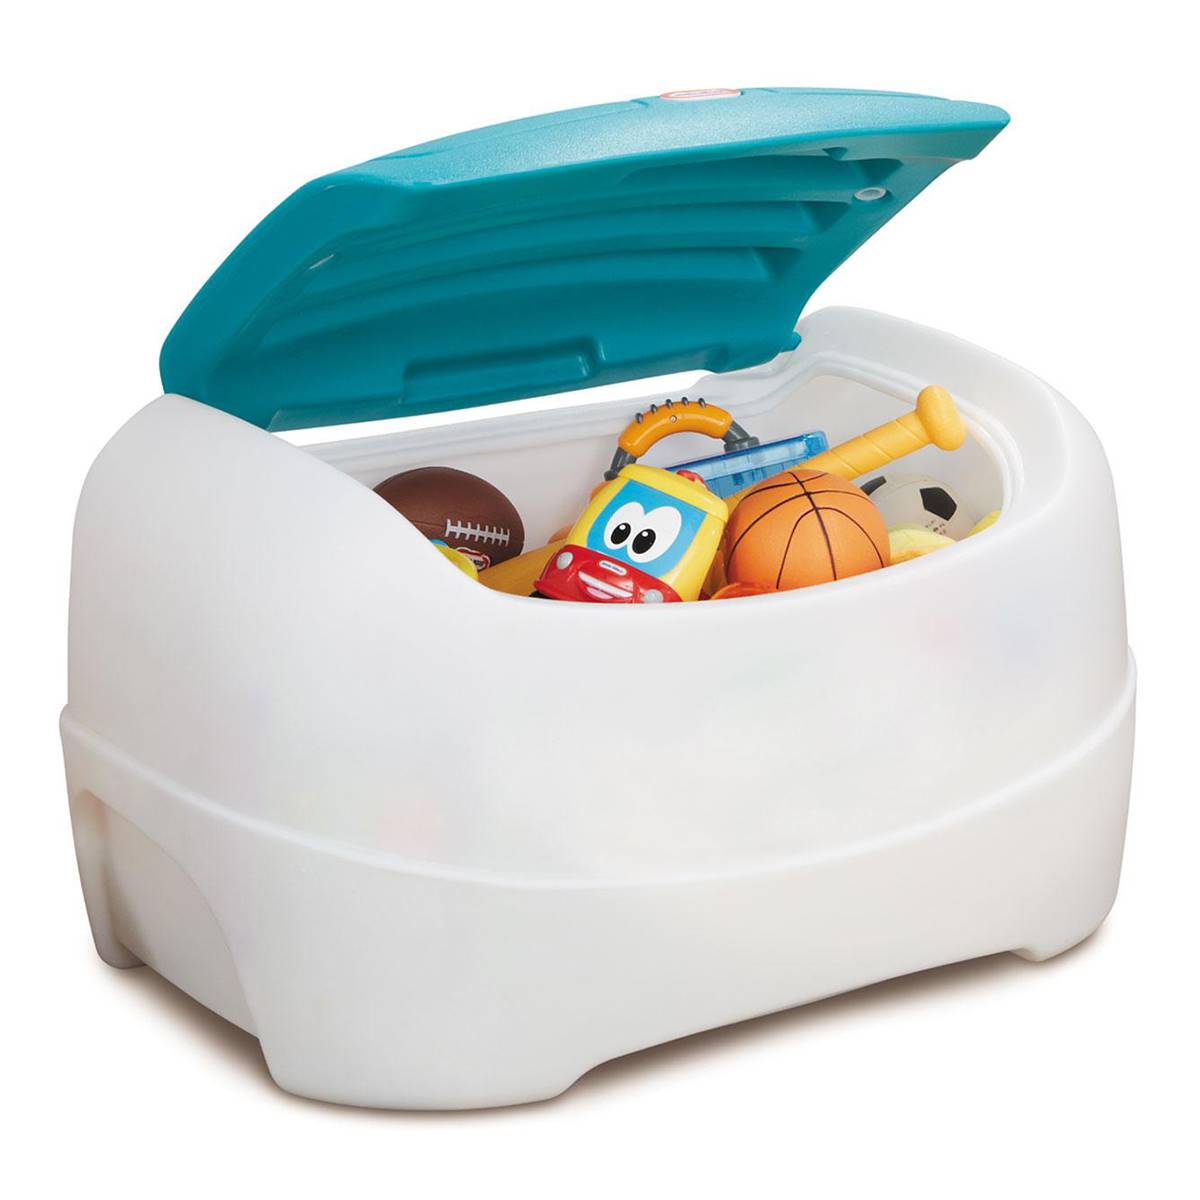 Little Tikes Play N' Store Toy Chest